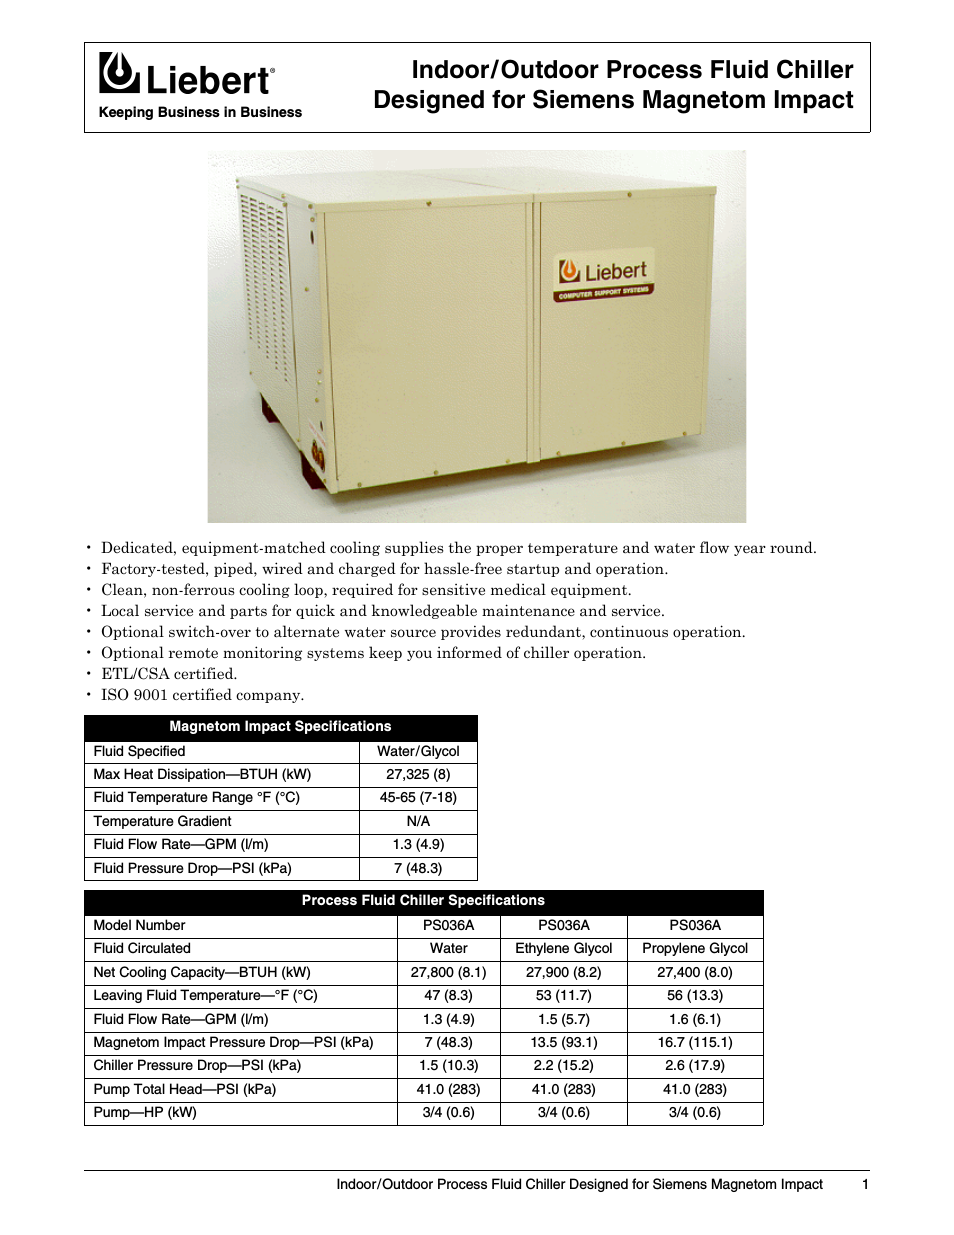 Indoor/Outdoor Process Chiller PS036A